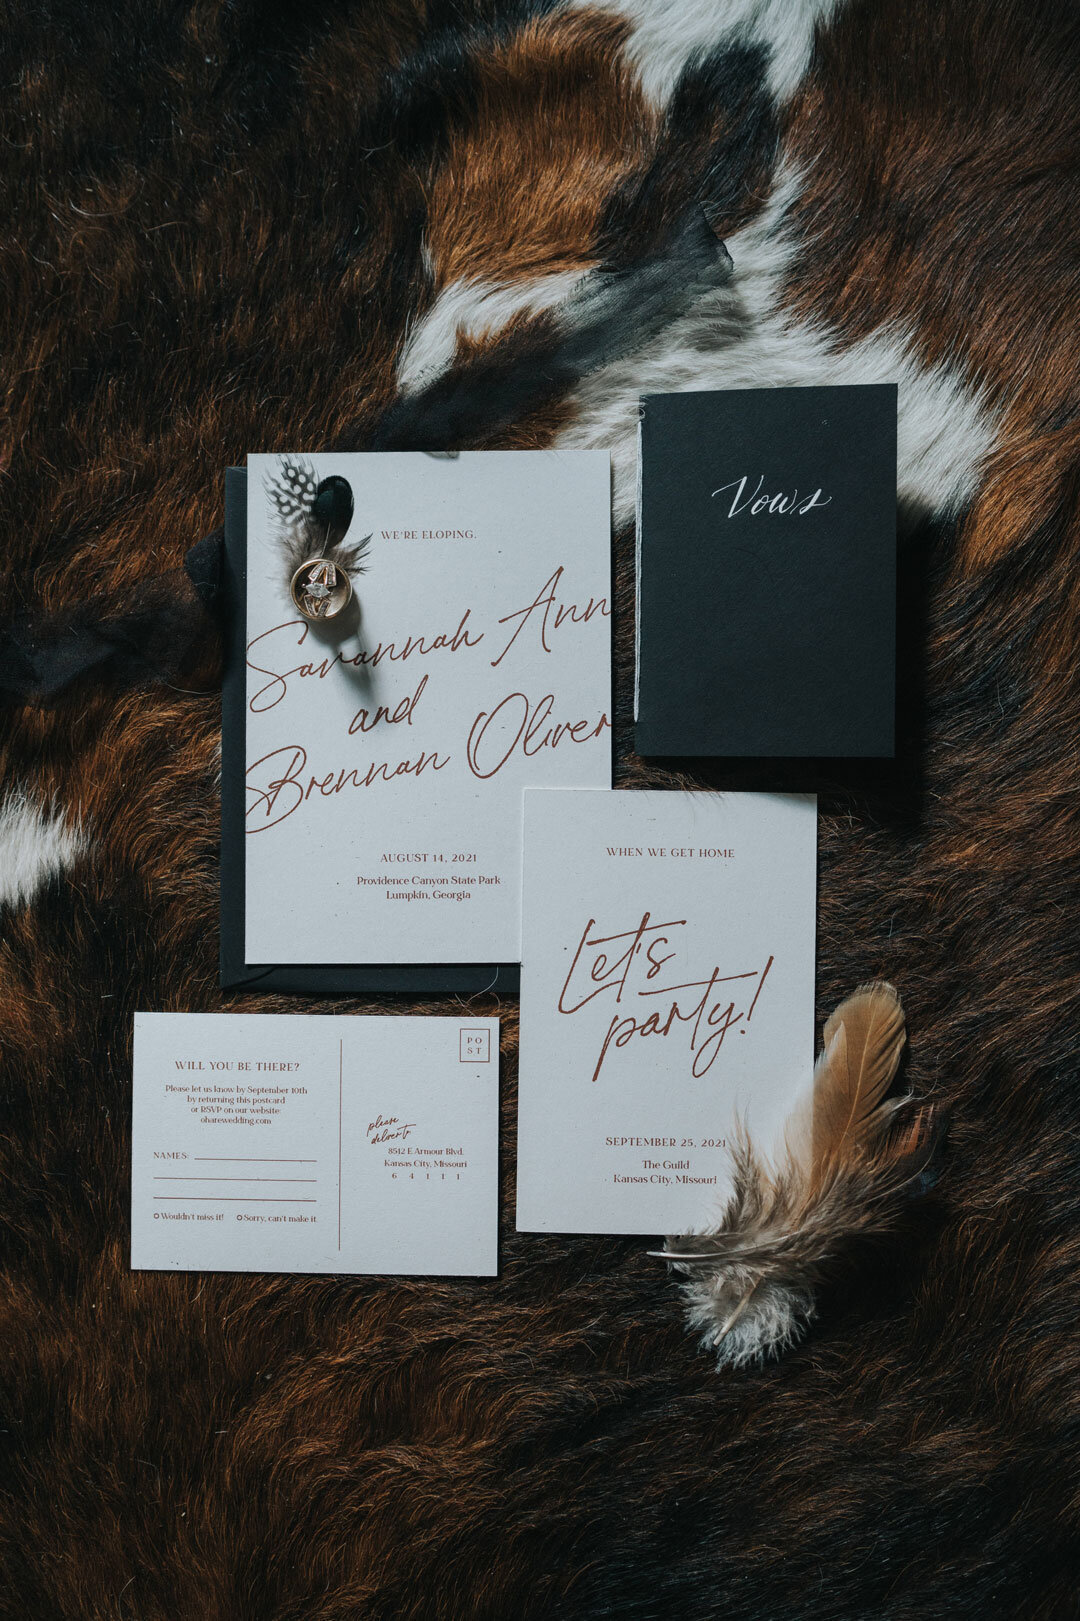 White wedding invitation with red script next to a feather and black vow book